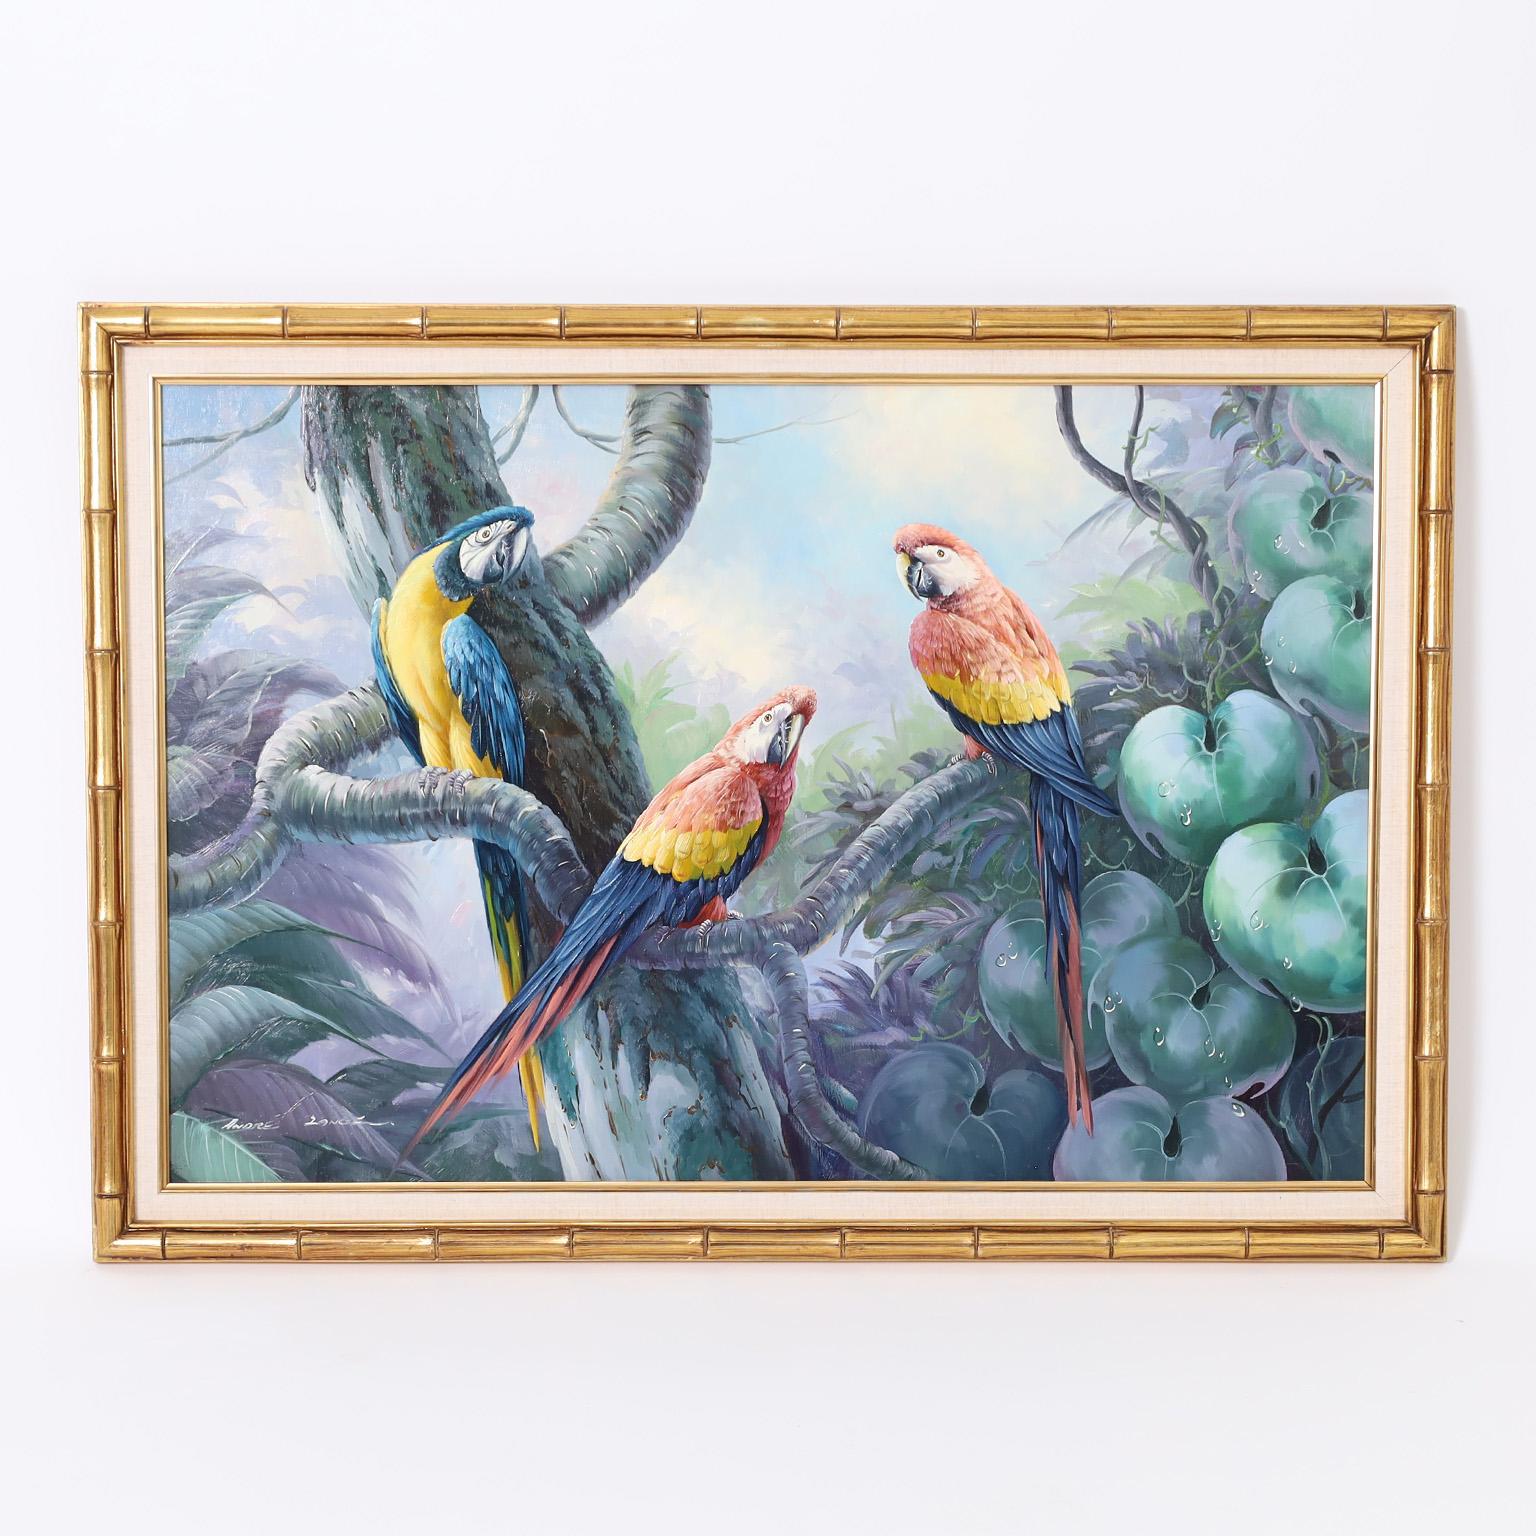 Unknown Animal Painting - Oil Painting on Canvas of Parrots